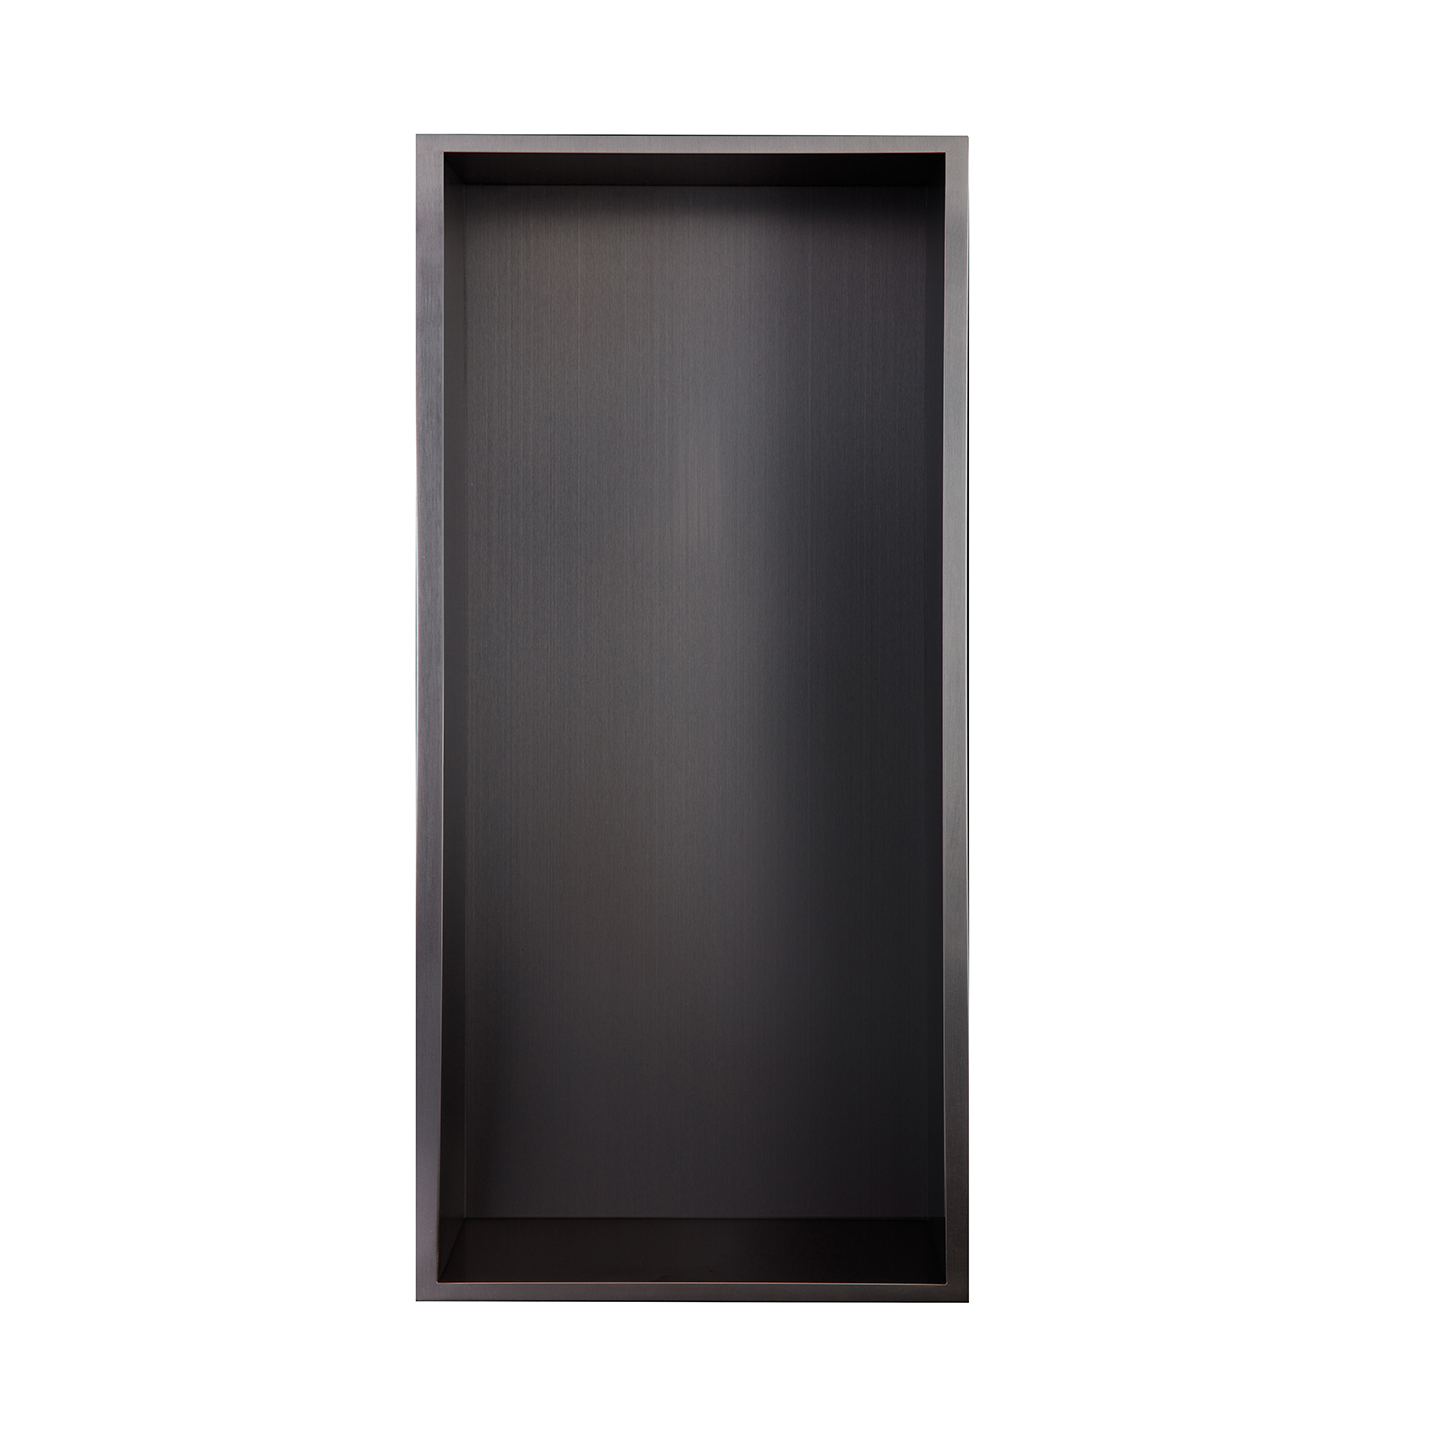 STAINLESS STEEL ONE BOX WALL NICHE